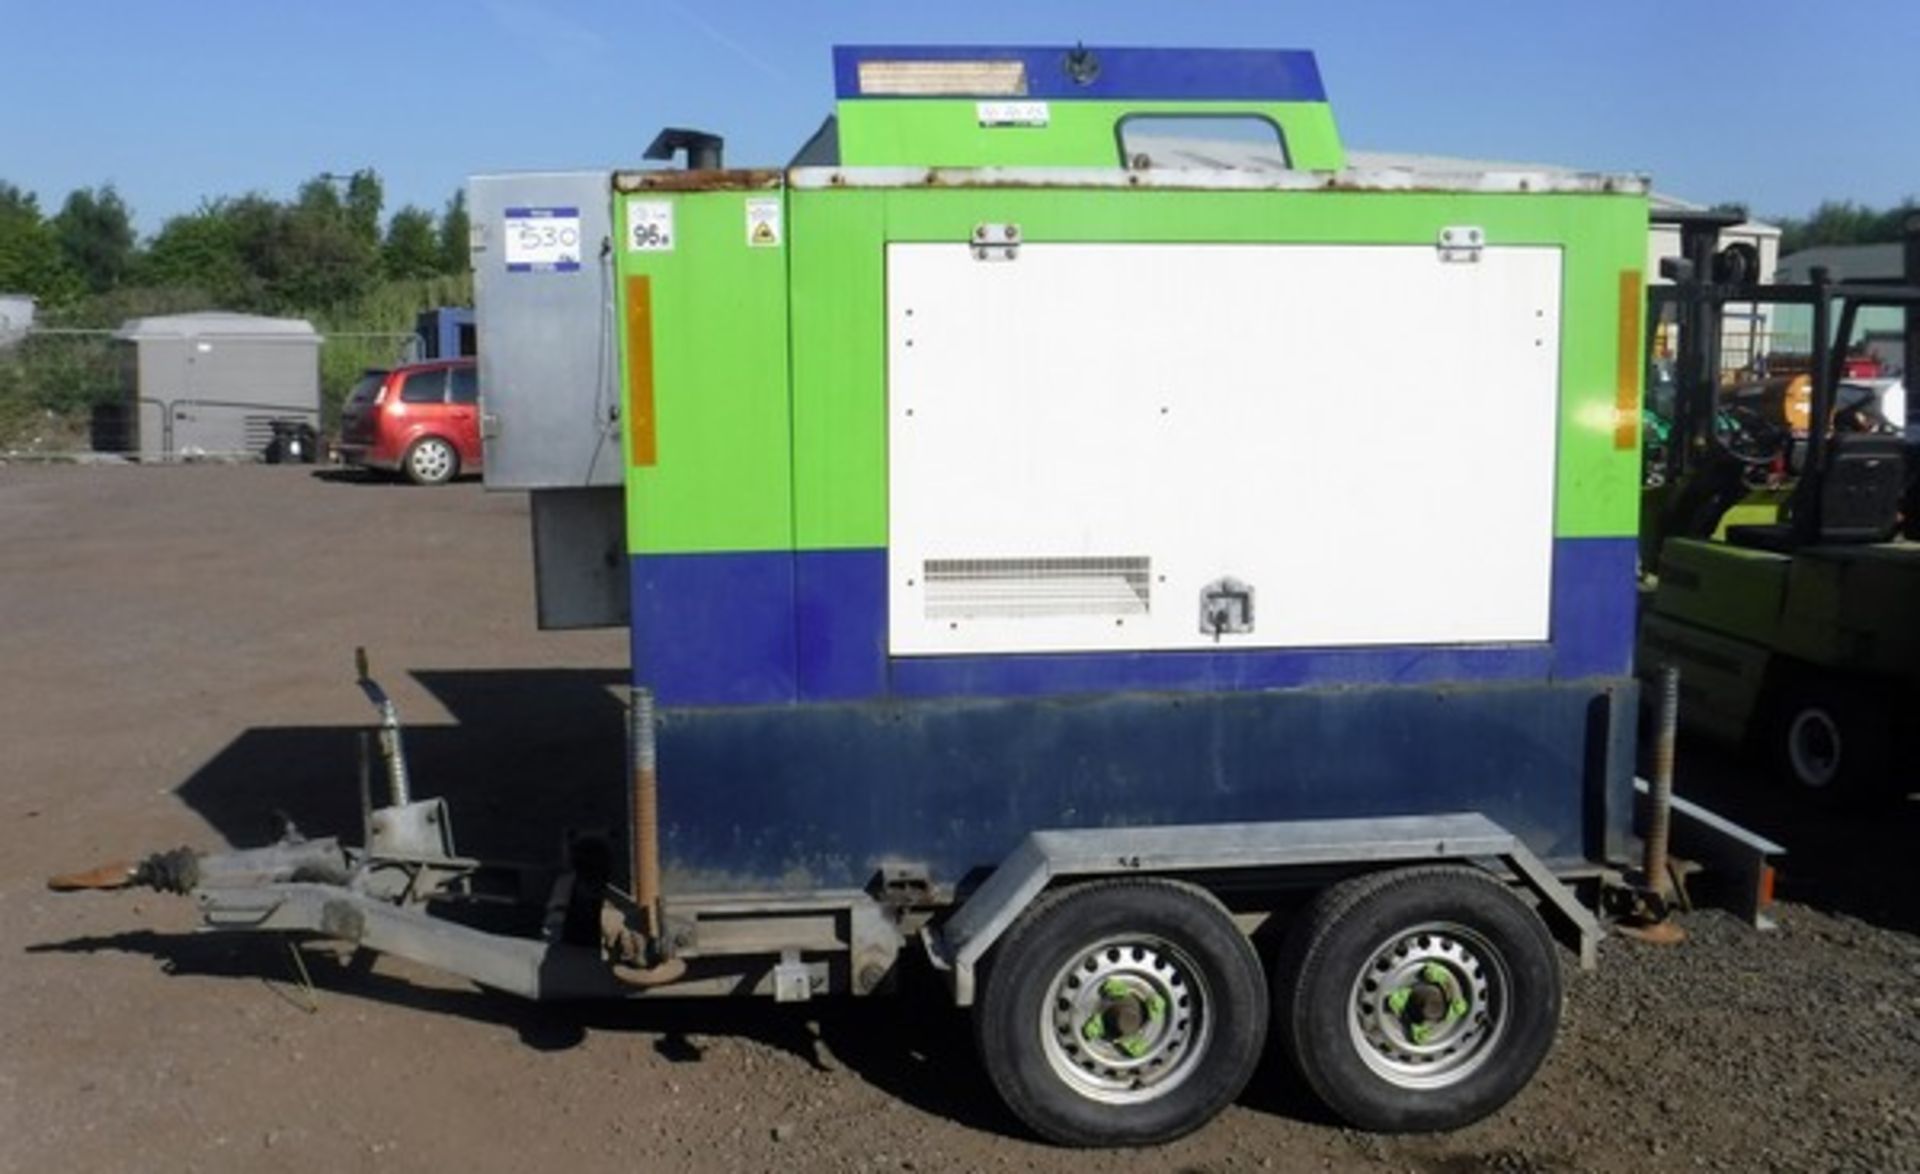 2002 FG WILSON LCH P60P1 60KVA 3 phase generator on a twin axle trailer 14392hrs (not verified) s/n